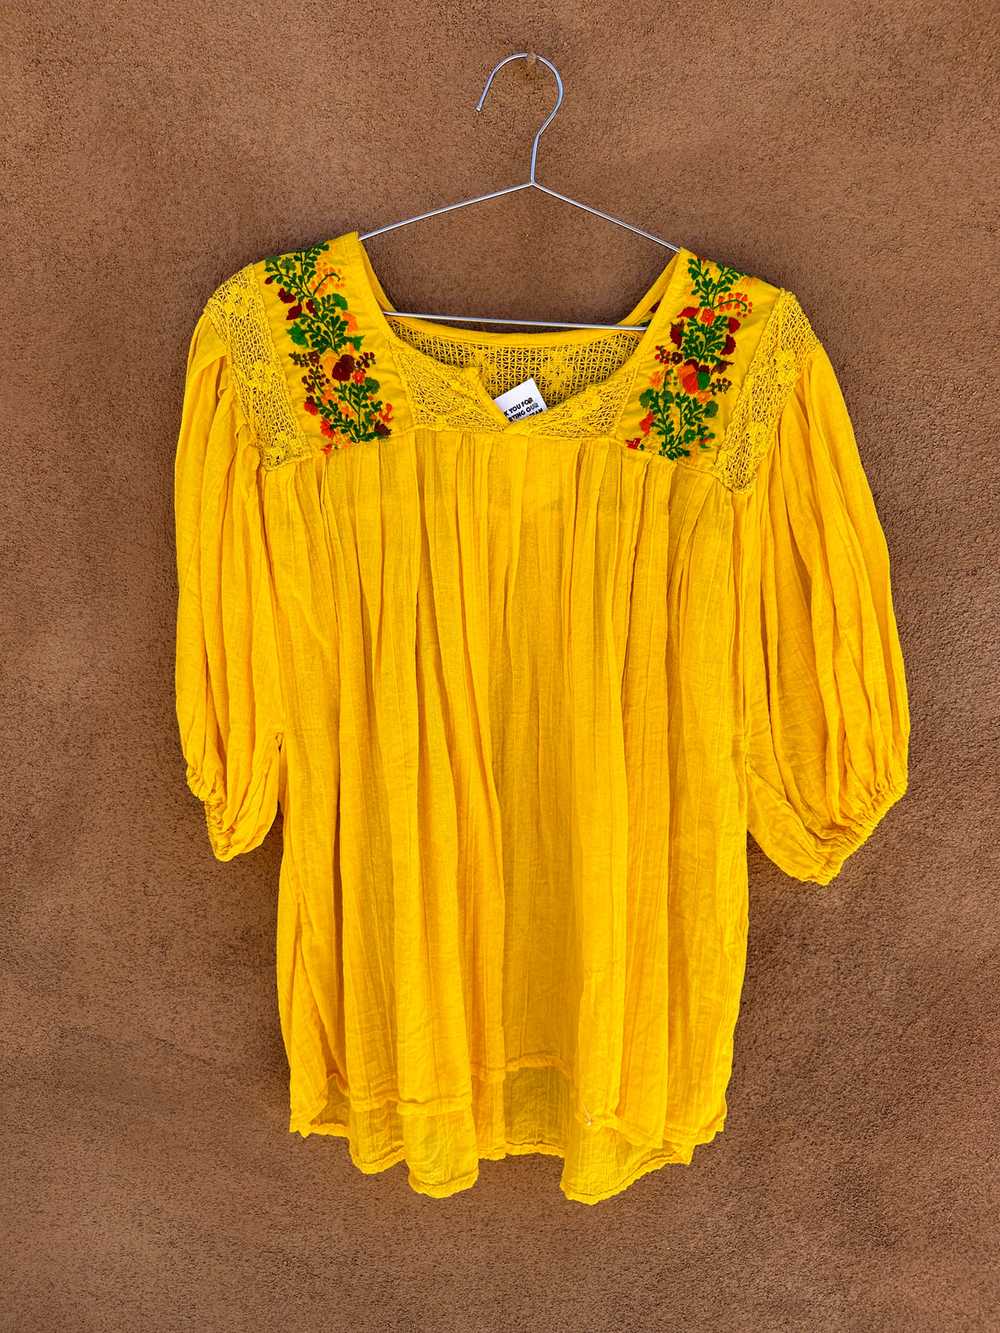 Yellow Embroidered Floral Mexican Blouse - image 1